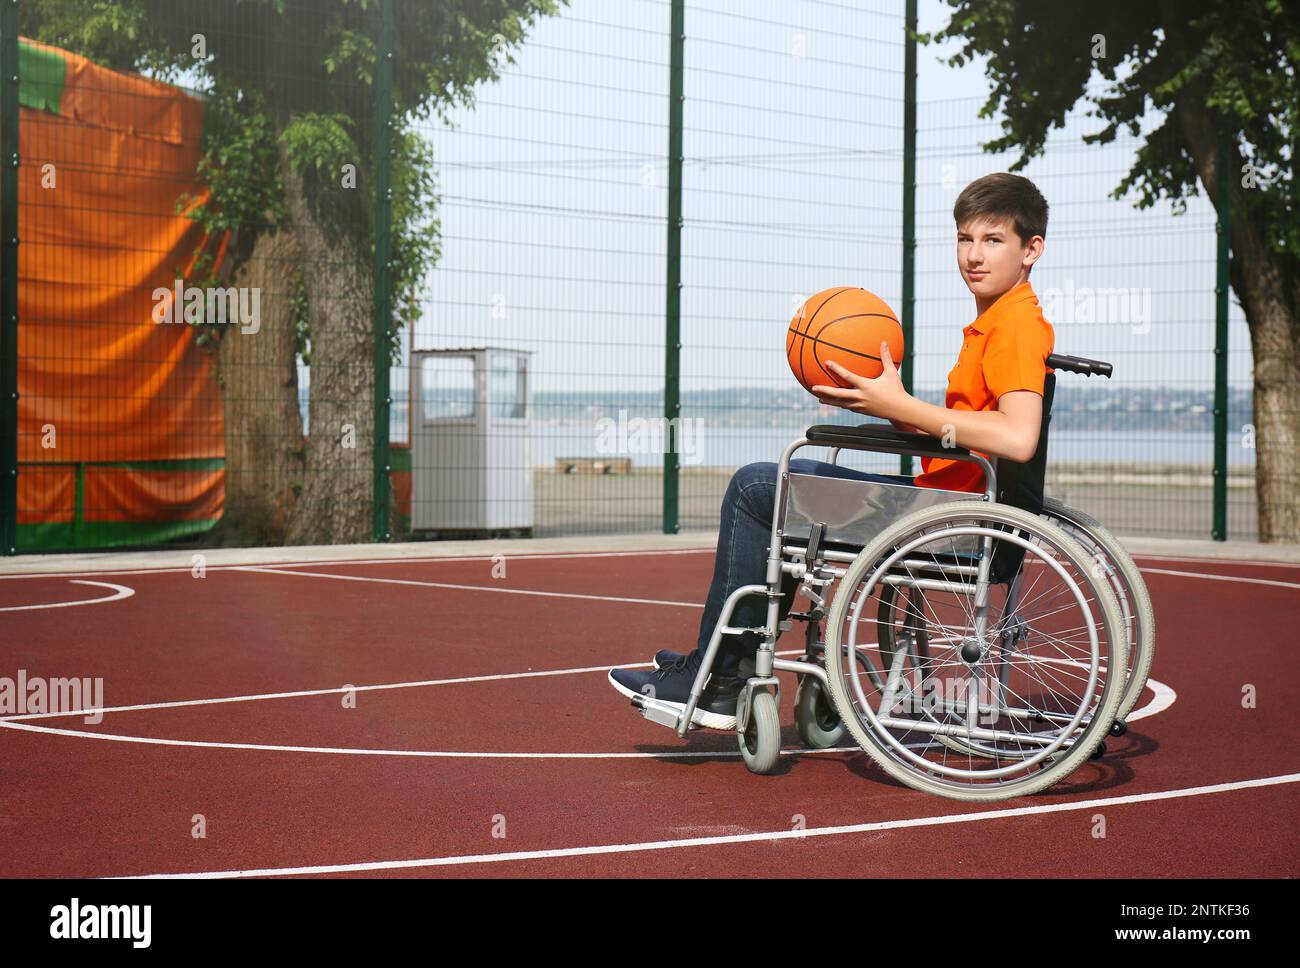 Disabled teenage boy in wheelchair with basketball ball at outdoor court Stock Photo